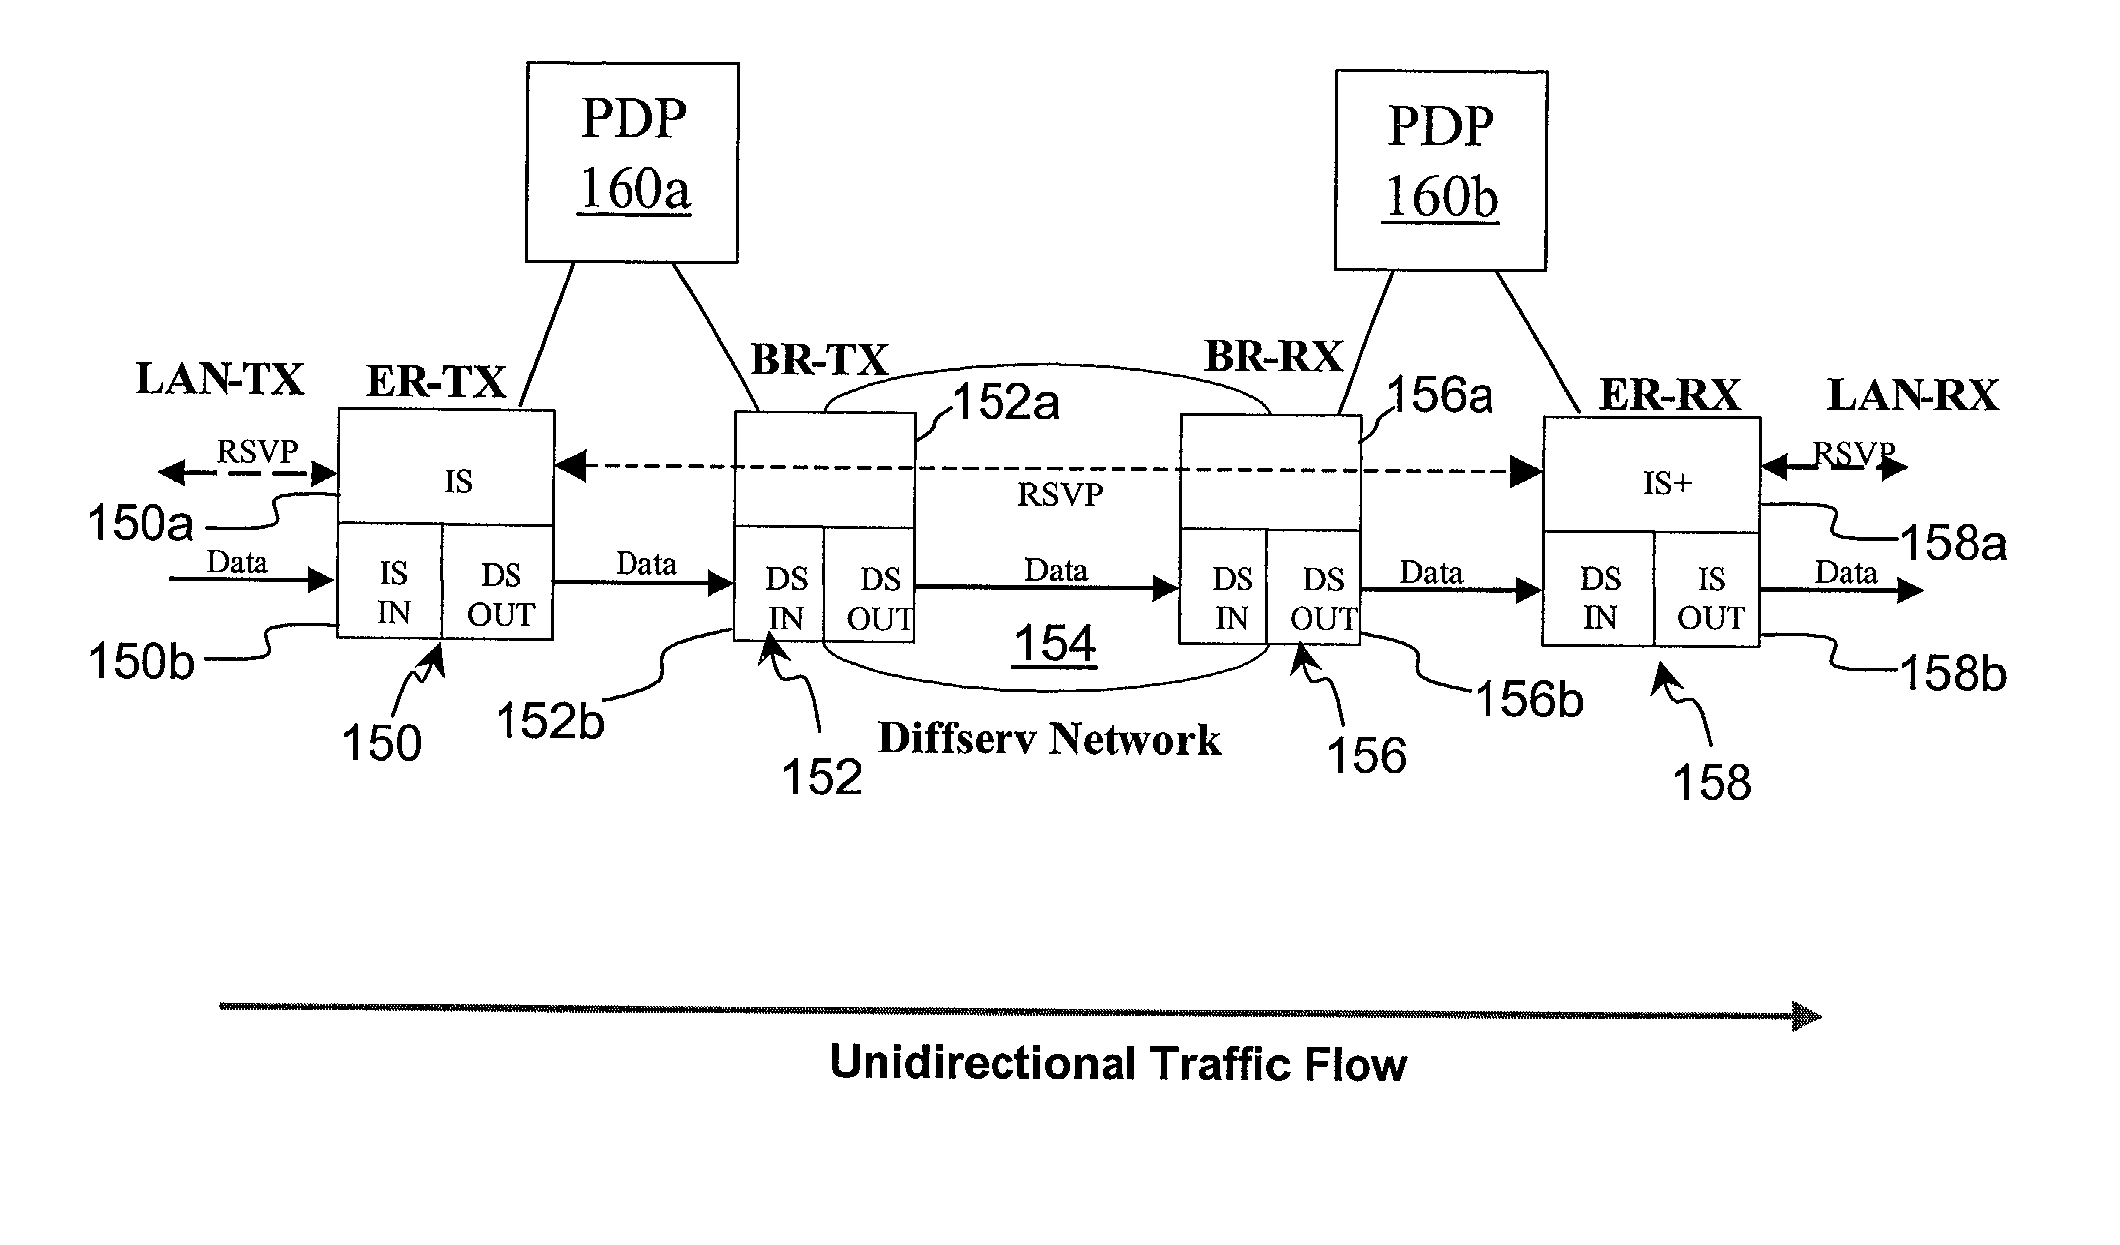 Policy-based synchronization of per-class resources between routers in a data network